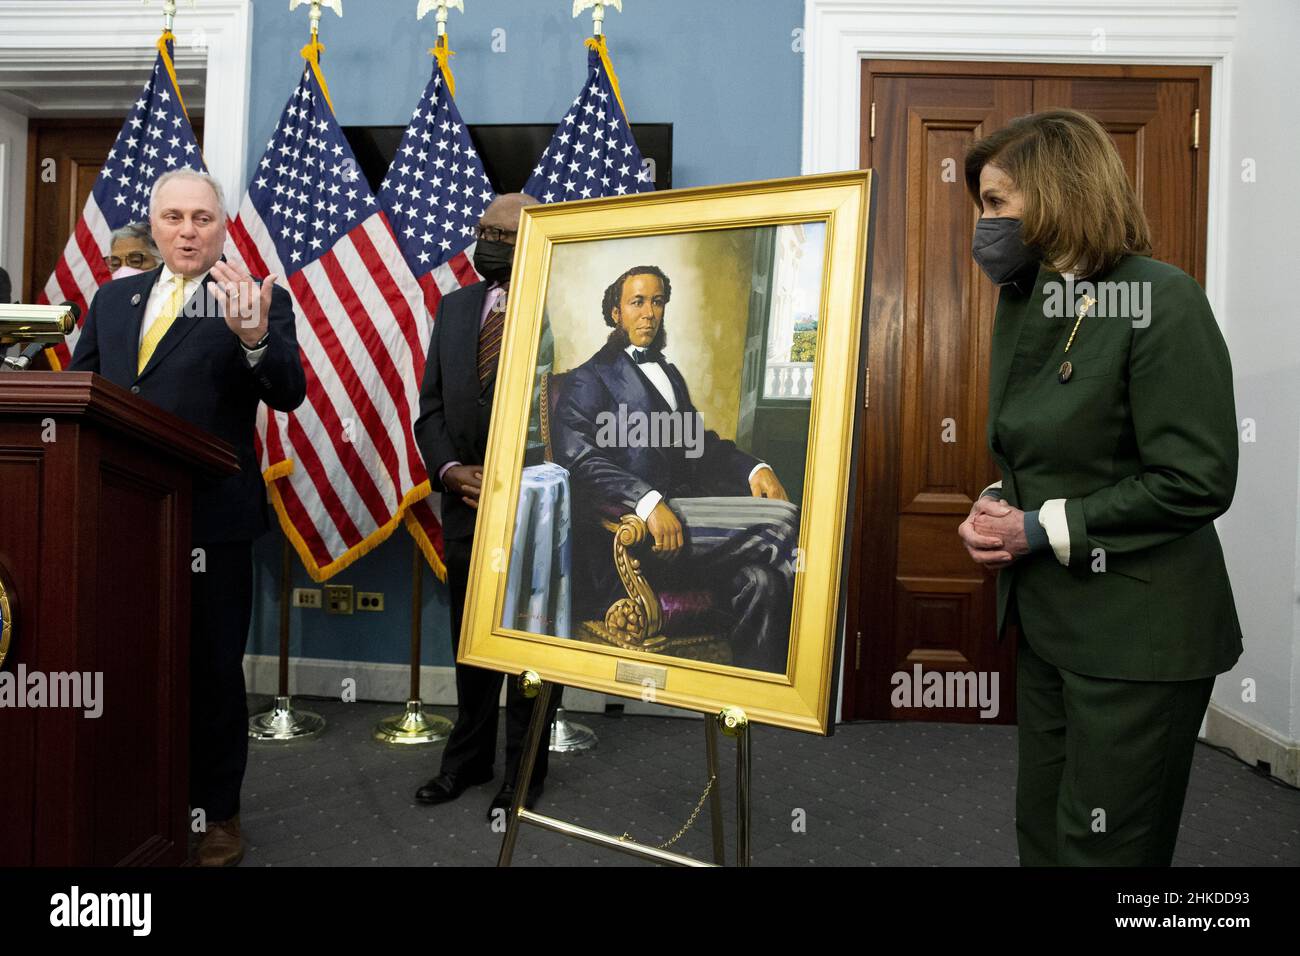 Washington, United States. 03rd Feb, 2022. United States Speaker of the House Nancy Pelosi (R) looks on as Republican Representative of Louisiana Steve Scalise (L) speaks beside a portrait of Joseph H. Rainey, during an unveiling ceremony for the Joseph H. Rainey Room, on Capitol Hill in Washington, DC, on Thursday, February 3, 2022. Rainey was the first black person to serve in the United States House of Representatives. Pool Photo by Michael Reynolds/UPI Credit: UPI/Alamy Live News Stock Photo